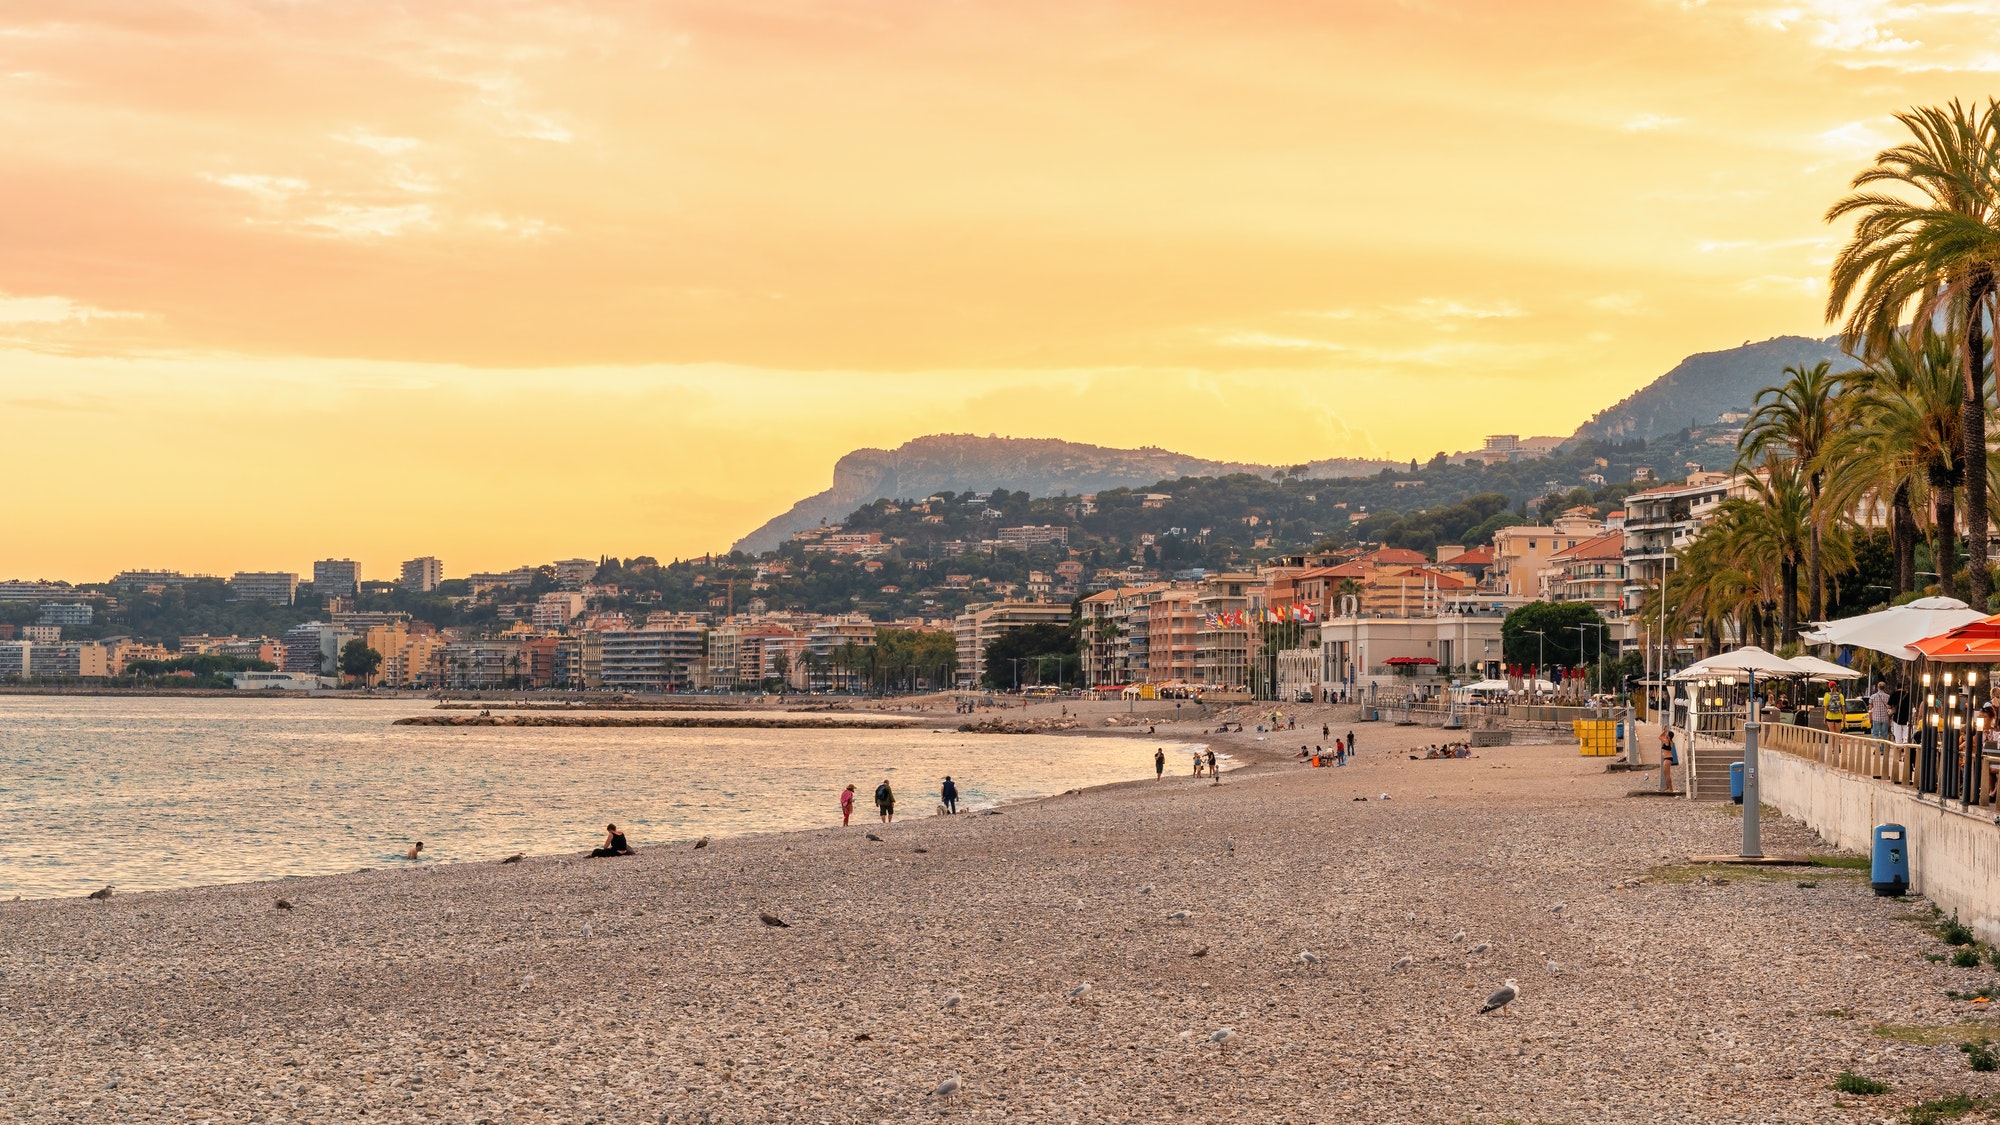 View of the cote d'Azur in Menton at sunset, France